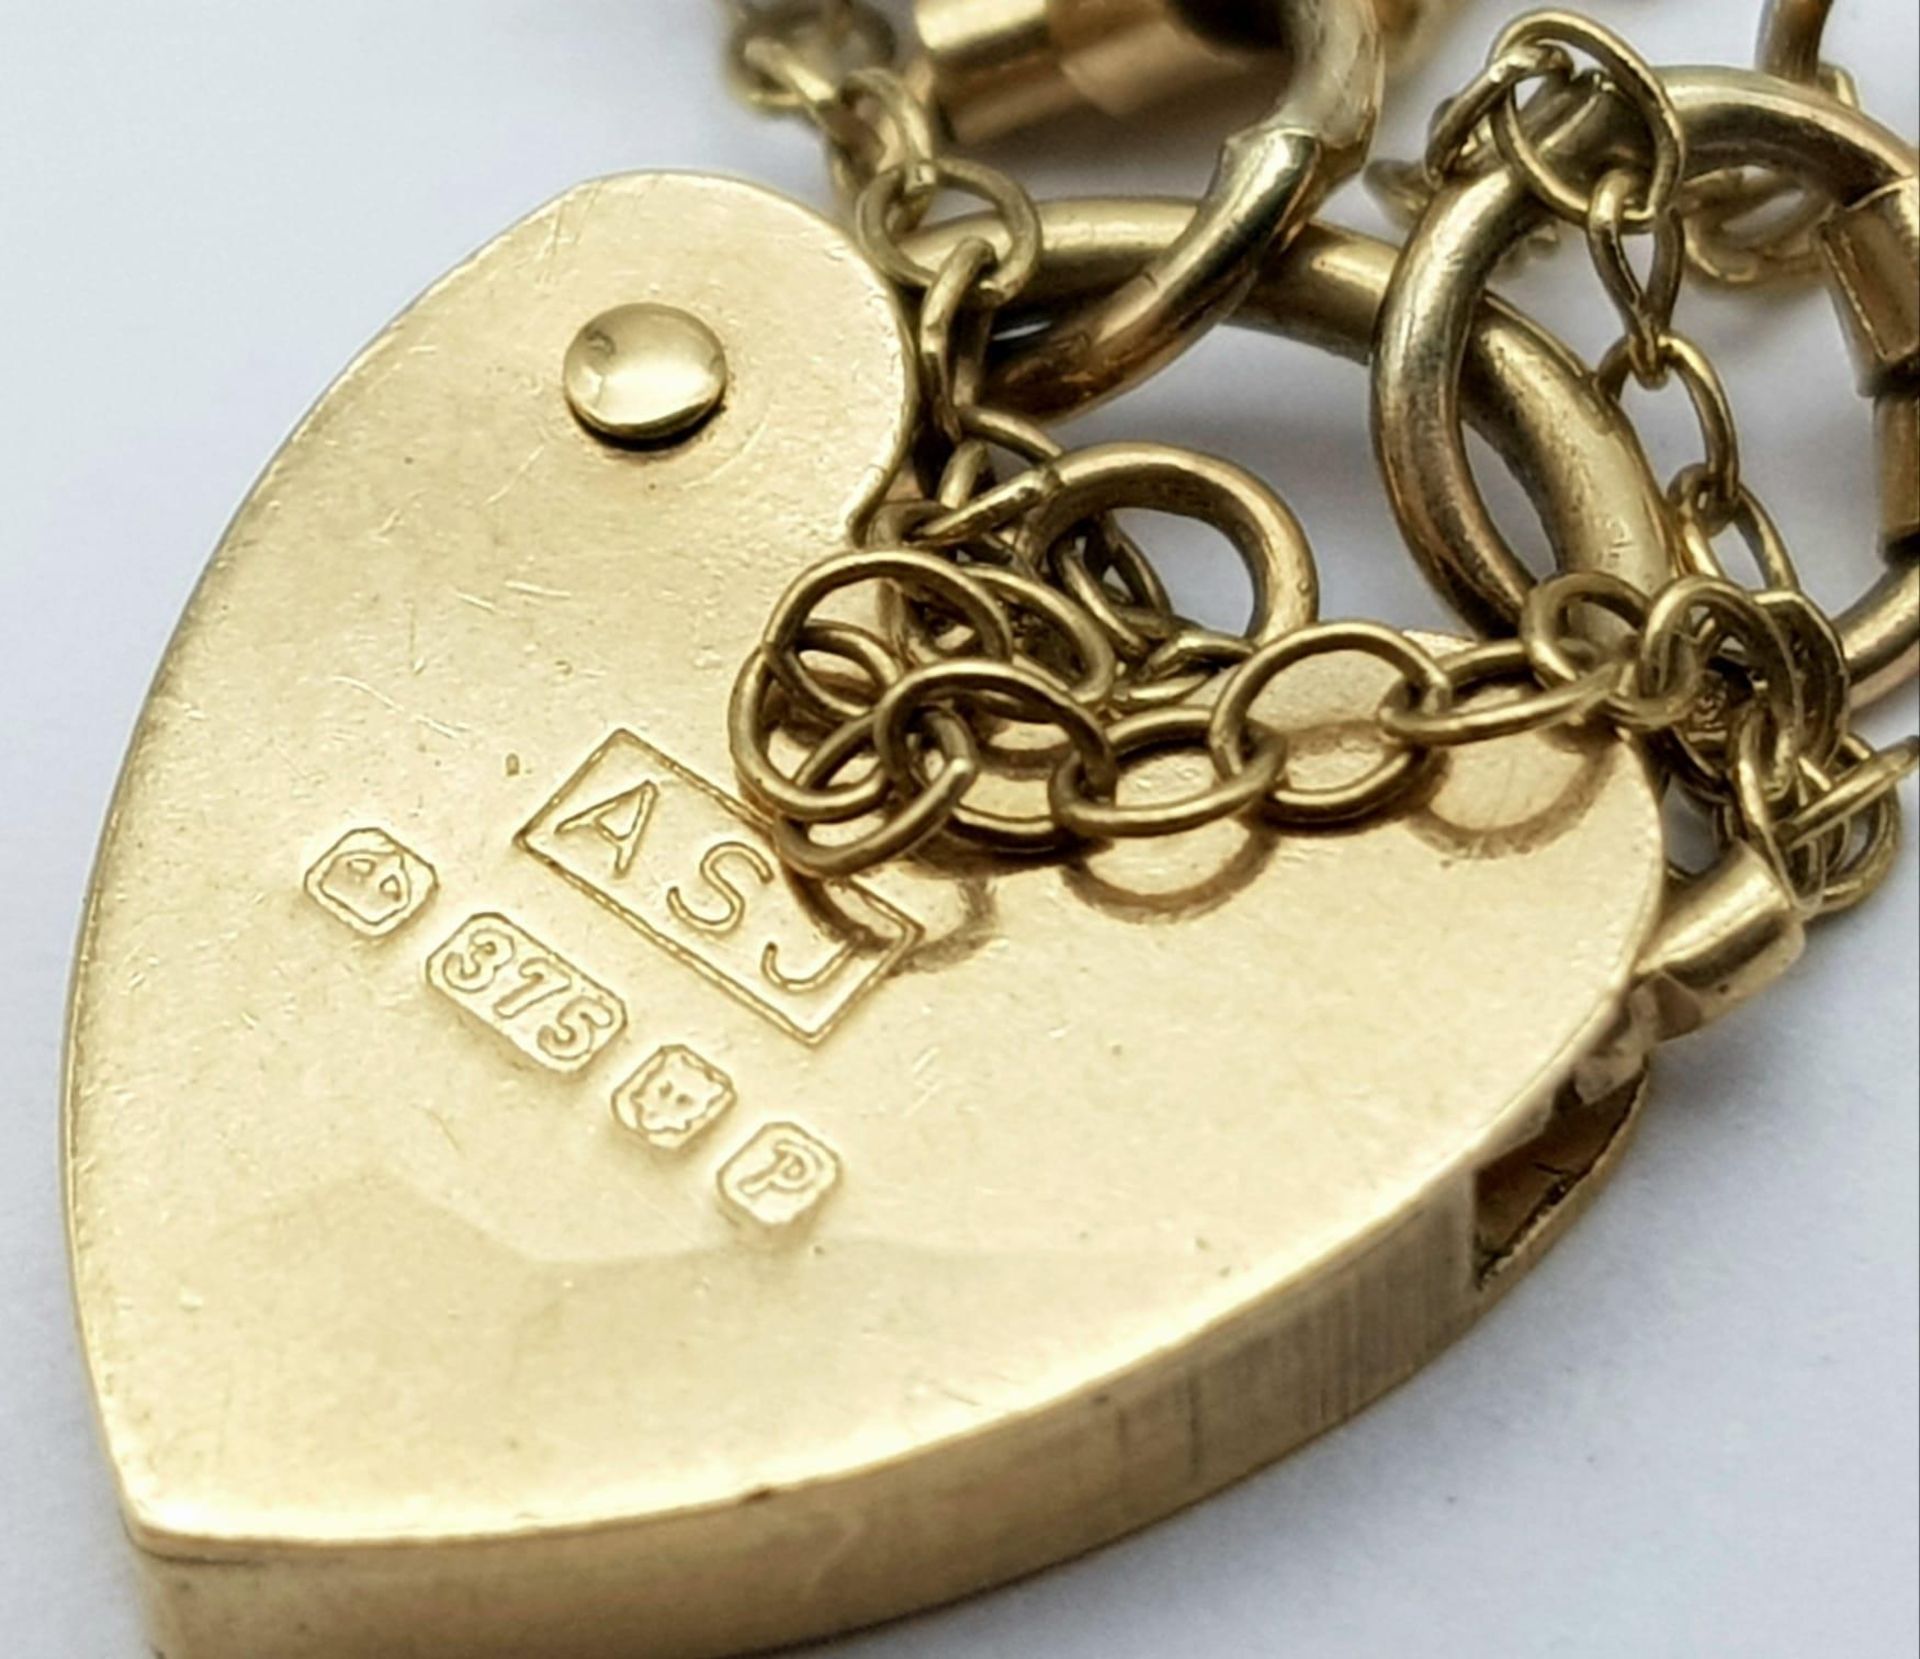 A Vintage 9K Yellow Gold Gate Bracelet with Heart Clasp. 16cm. 6.82g weight. - Image 4 of 5